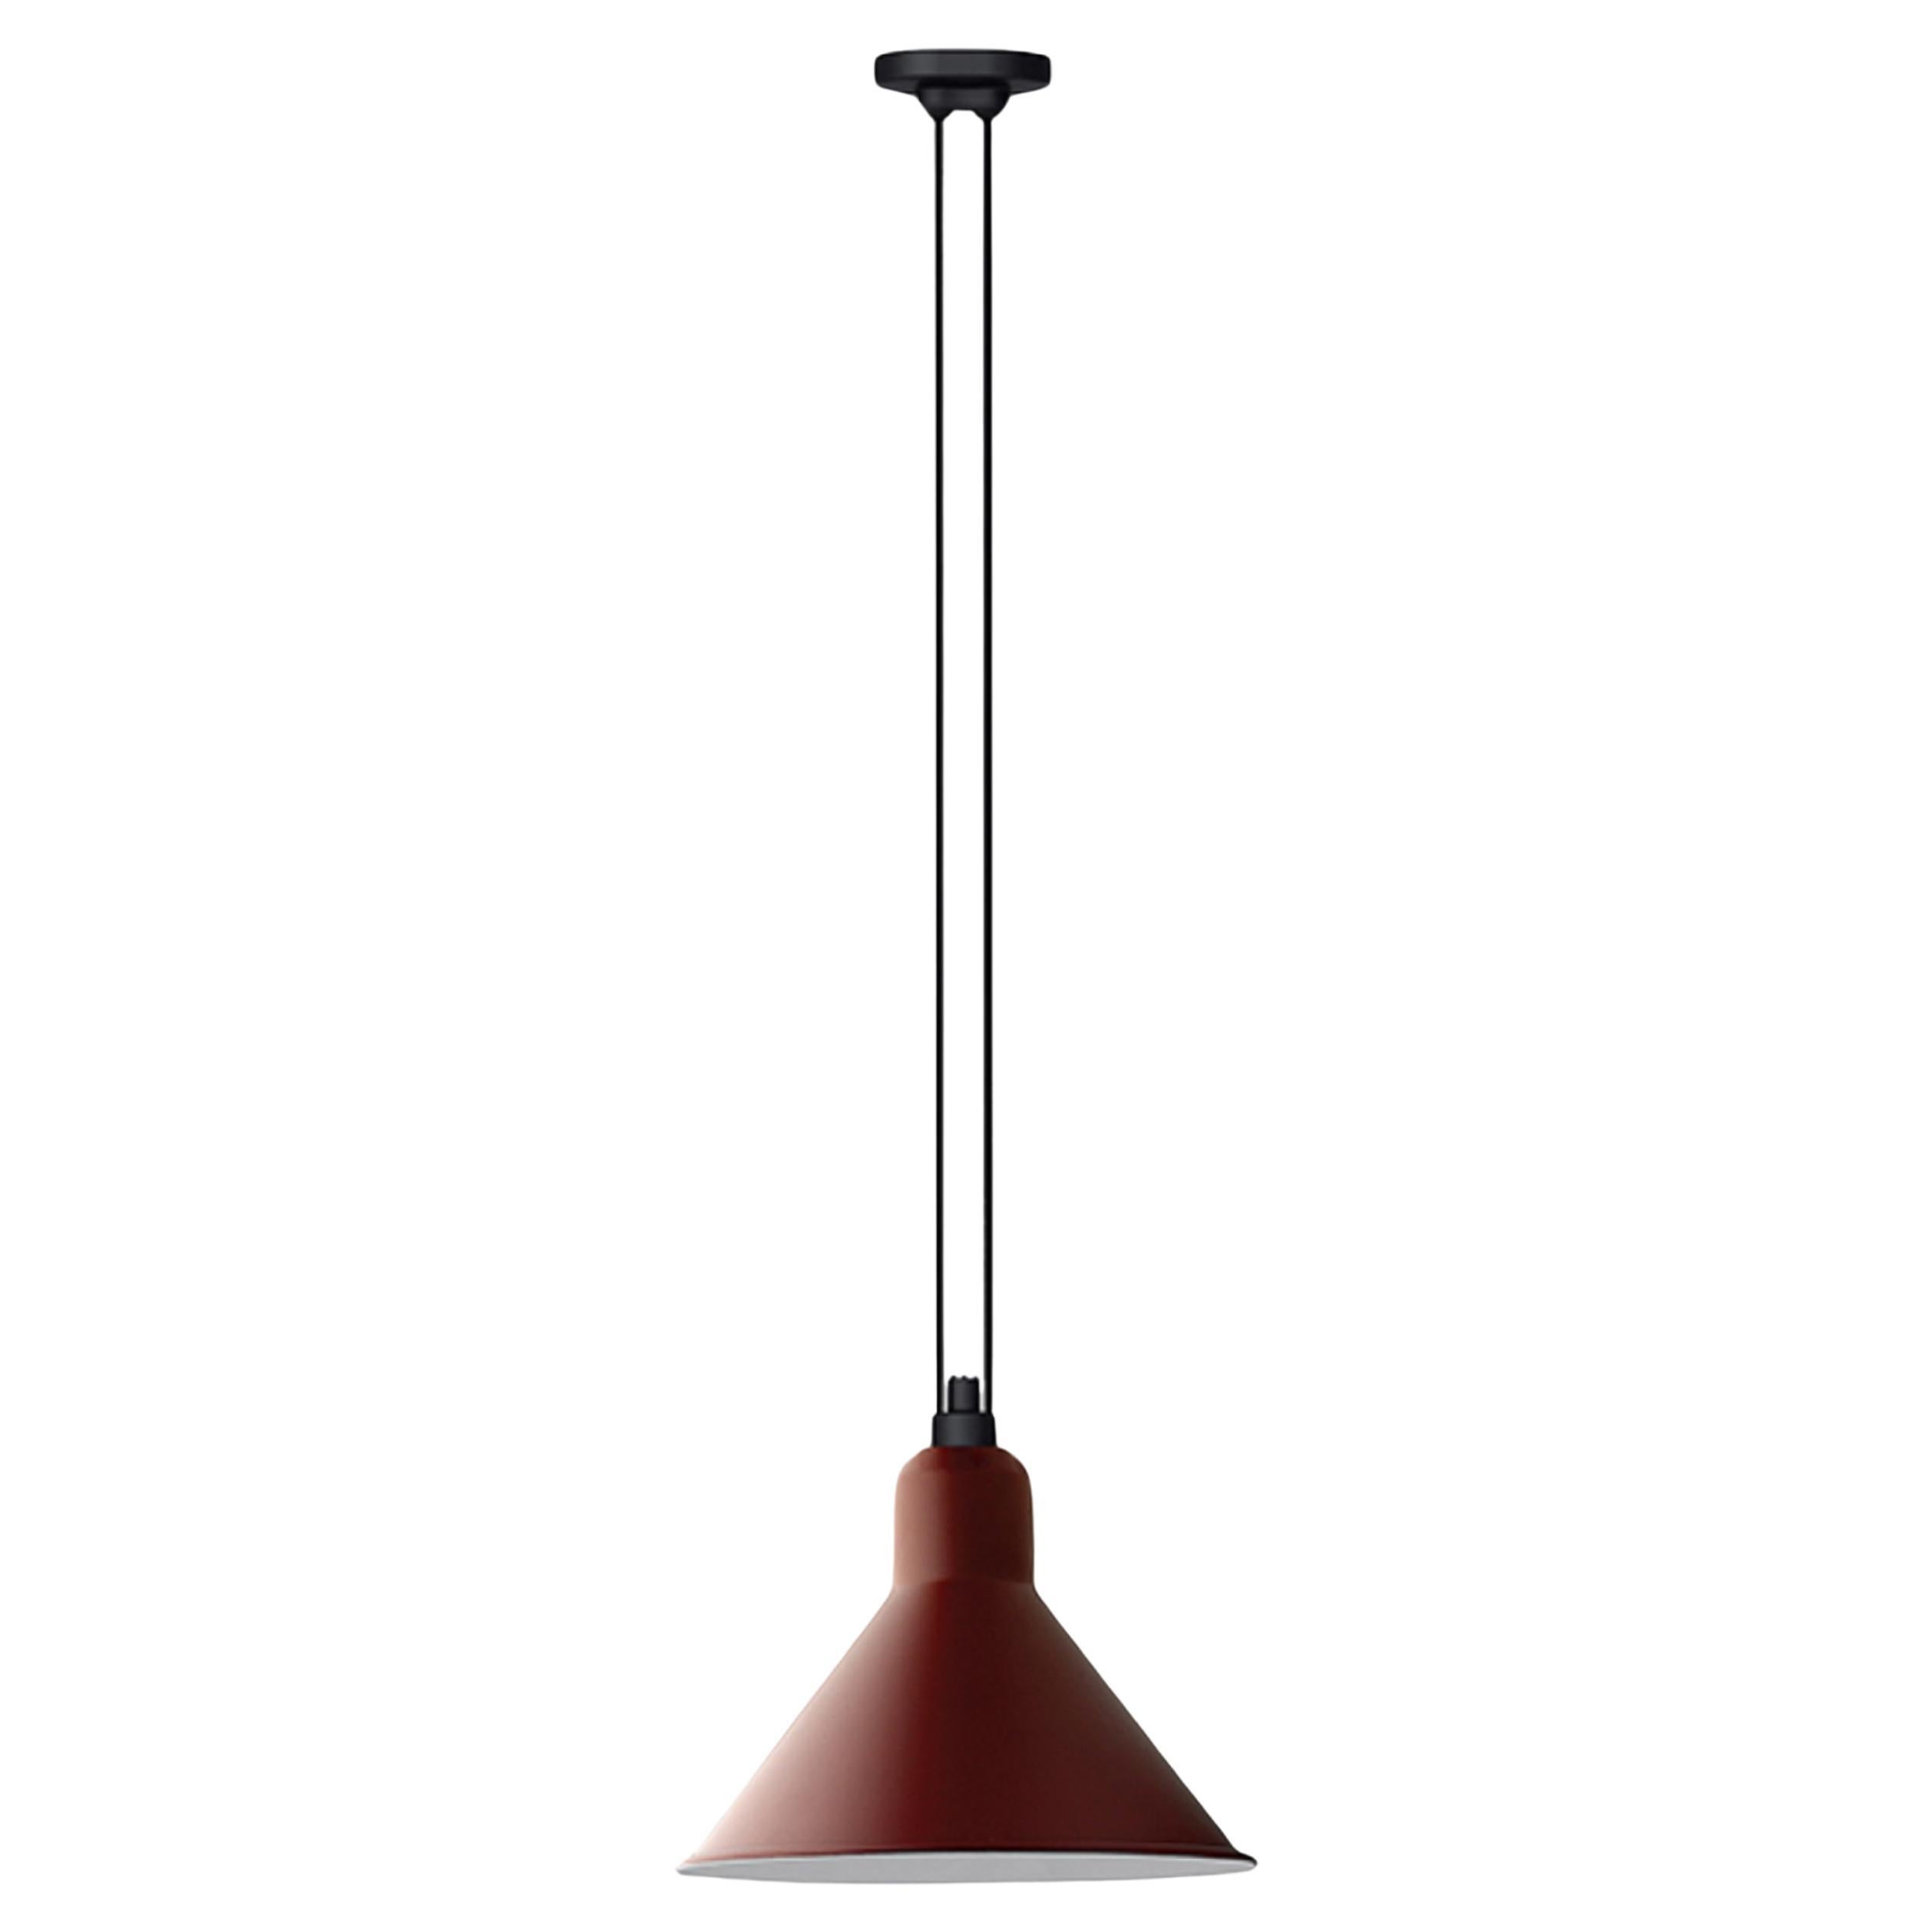 DCW Editions Les Acrobates N°322 XL Conic Pendant Lamp in Red Shade